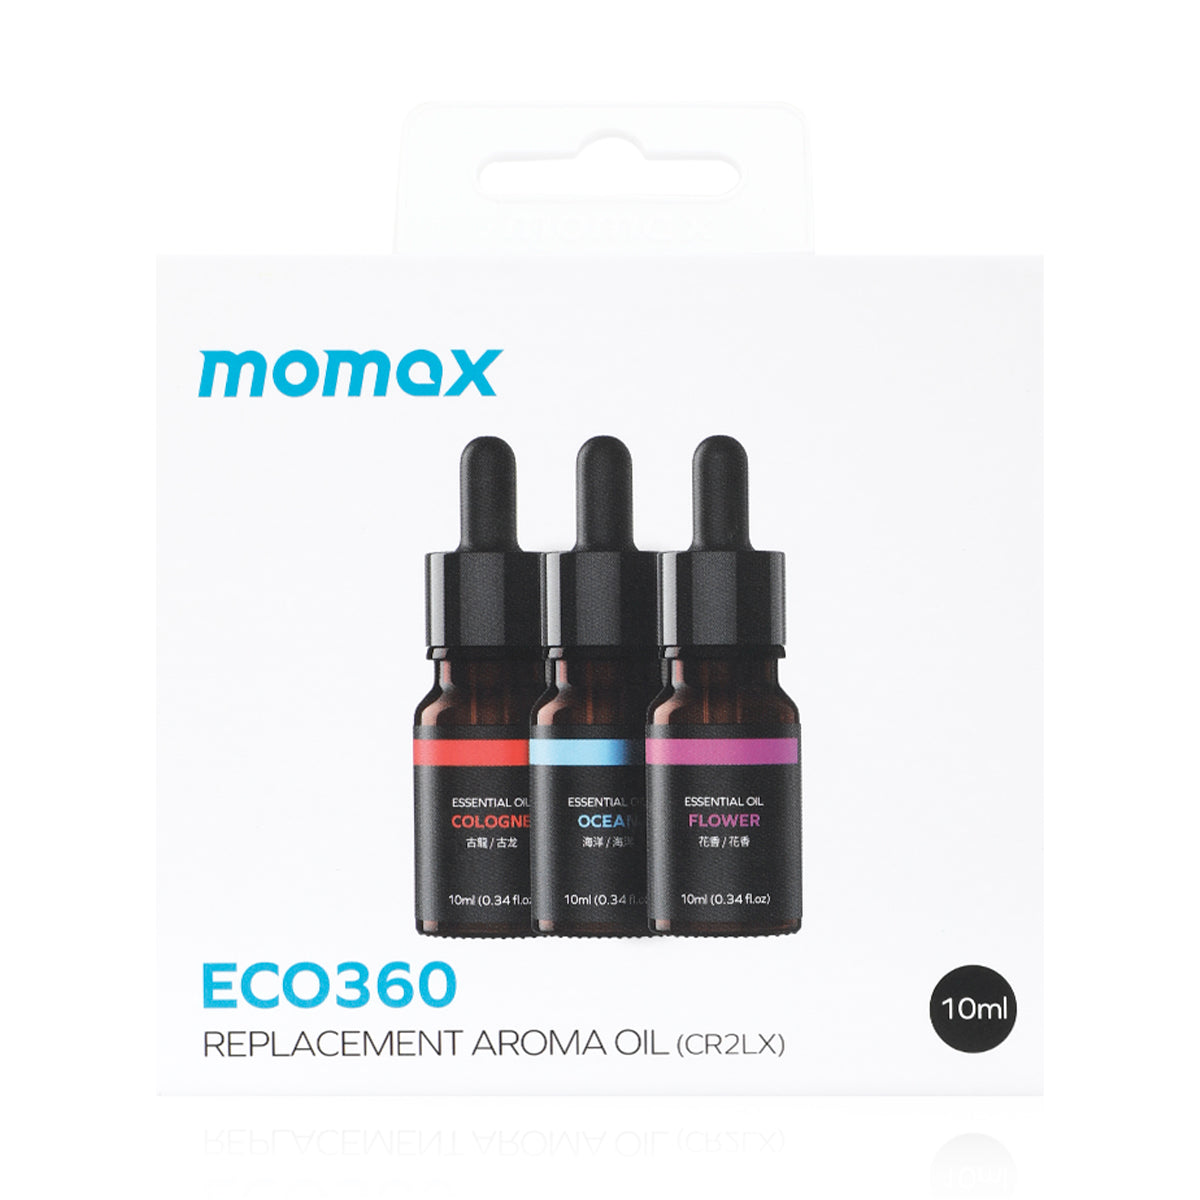 Momax ECO360 Replacement Aroma Oil